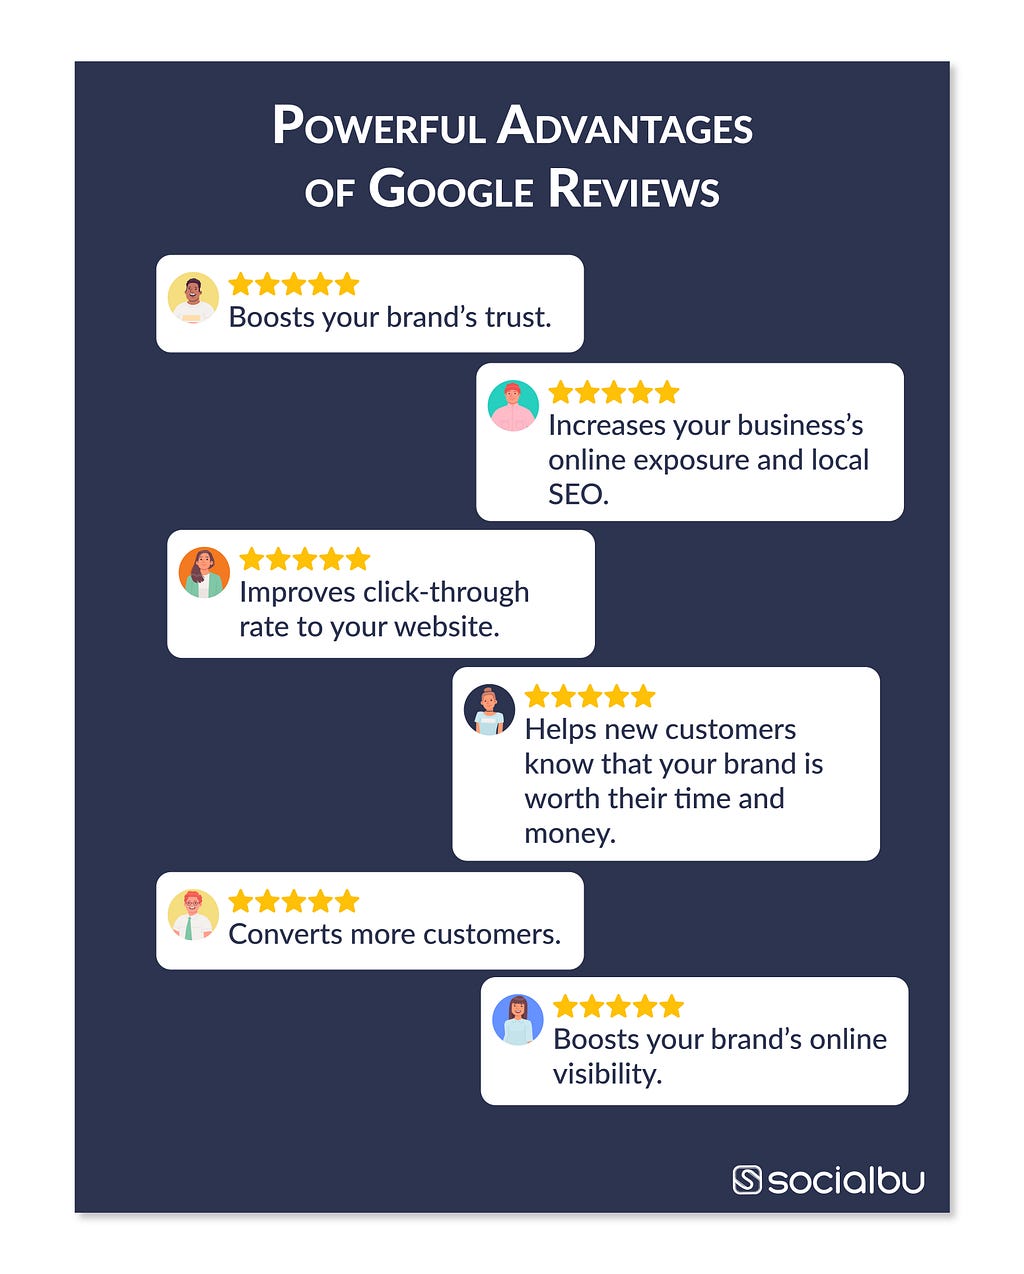 Powerful Advantages of Google Reviews